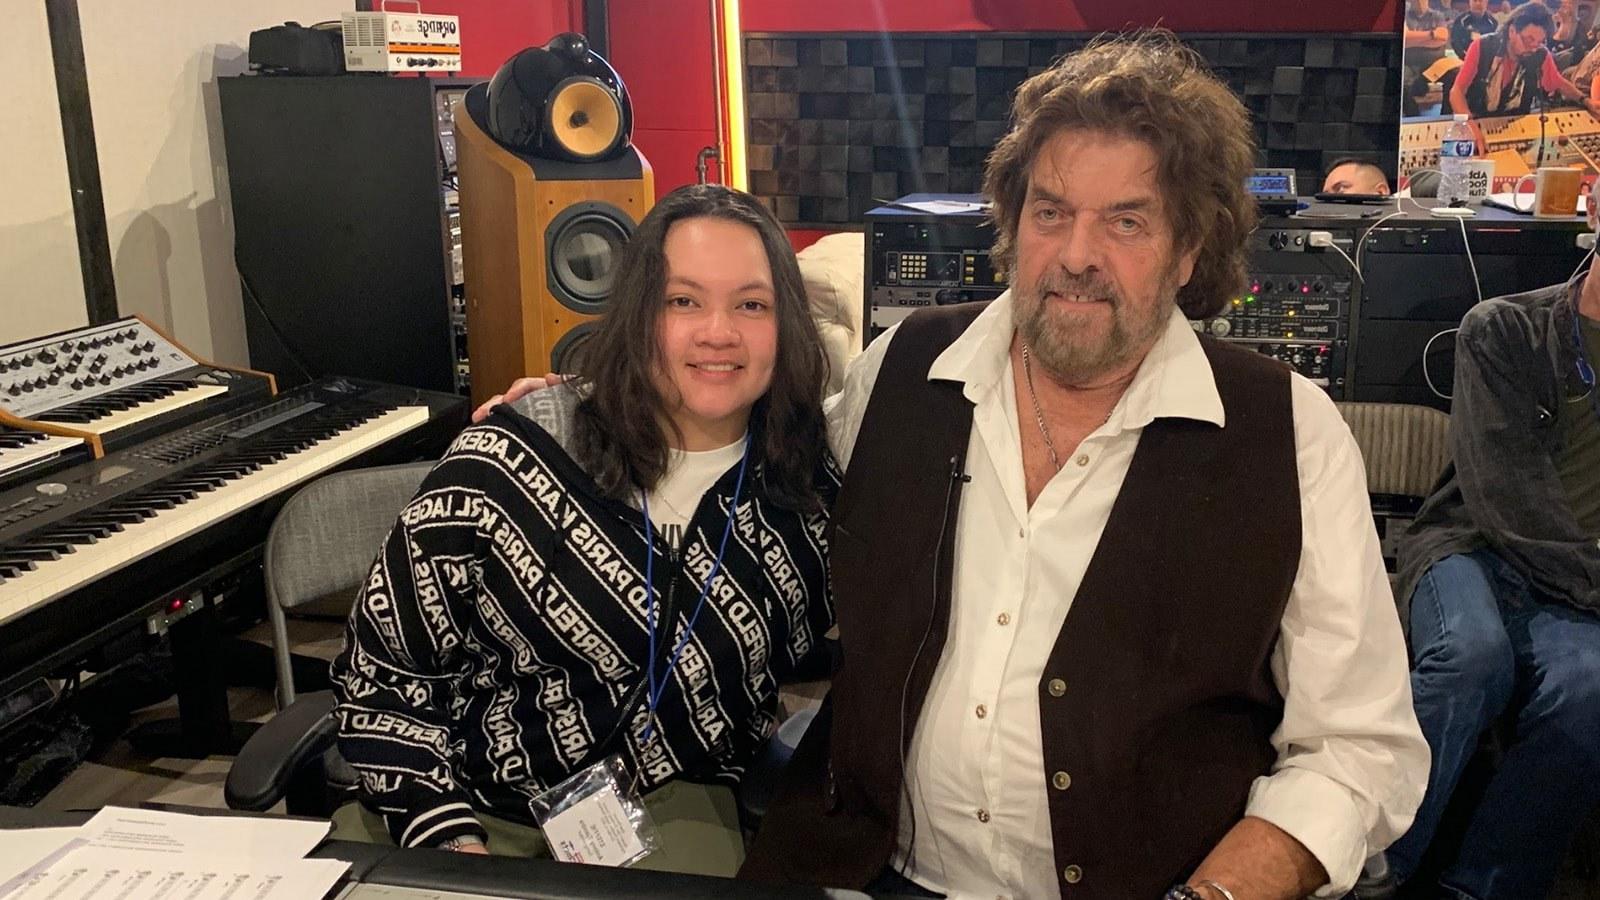 Alan Parsons sits with Steffie Tjandra in front of a mixing board in a recording studio. They are smiling at the camera.